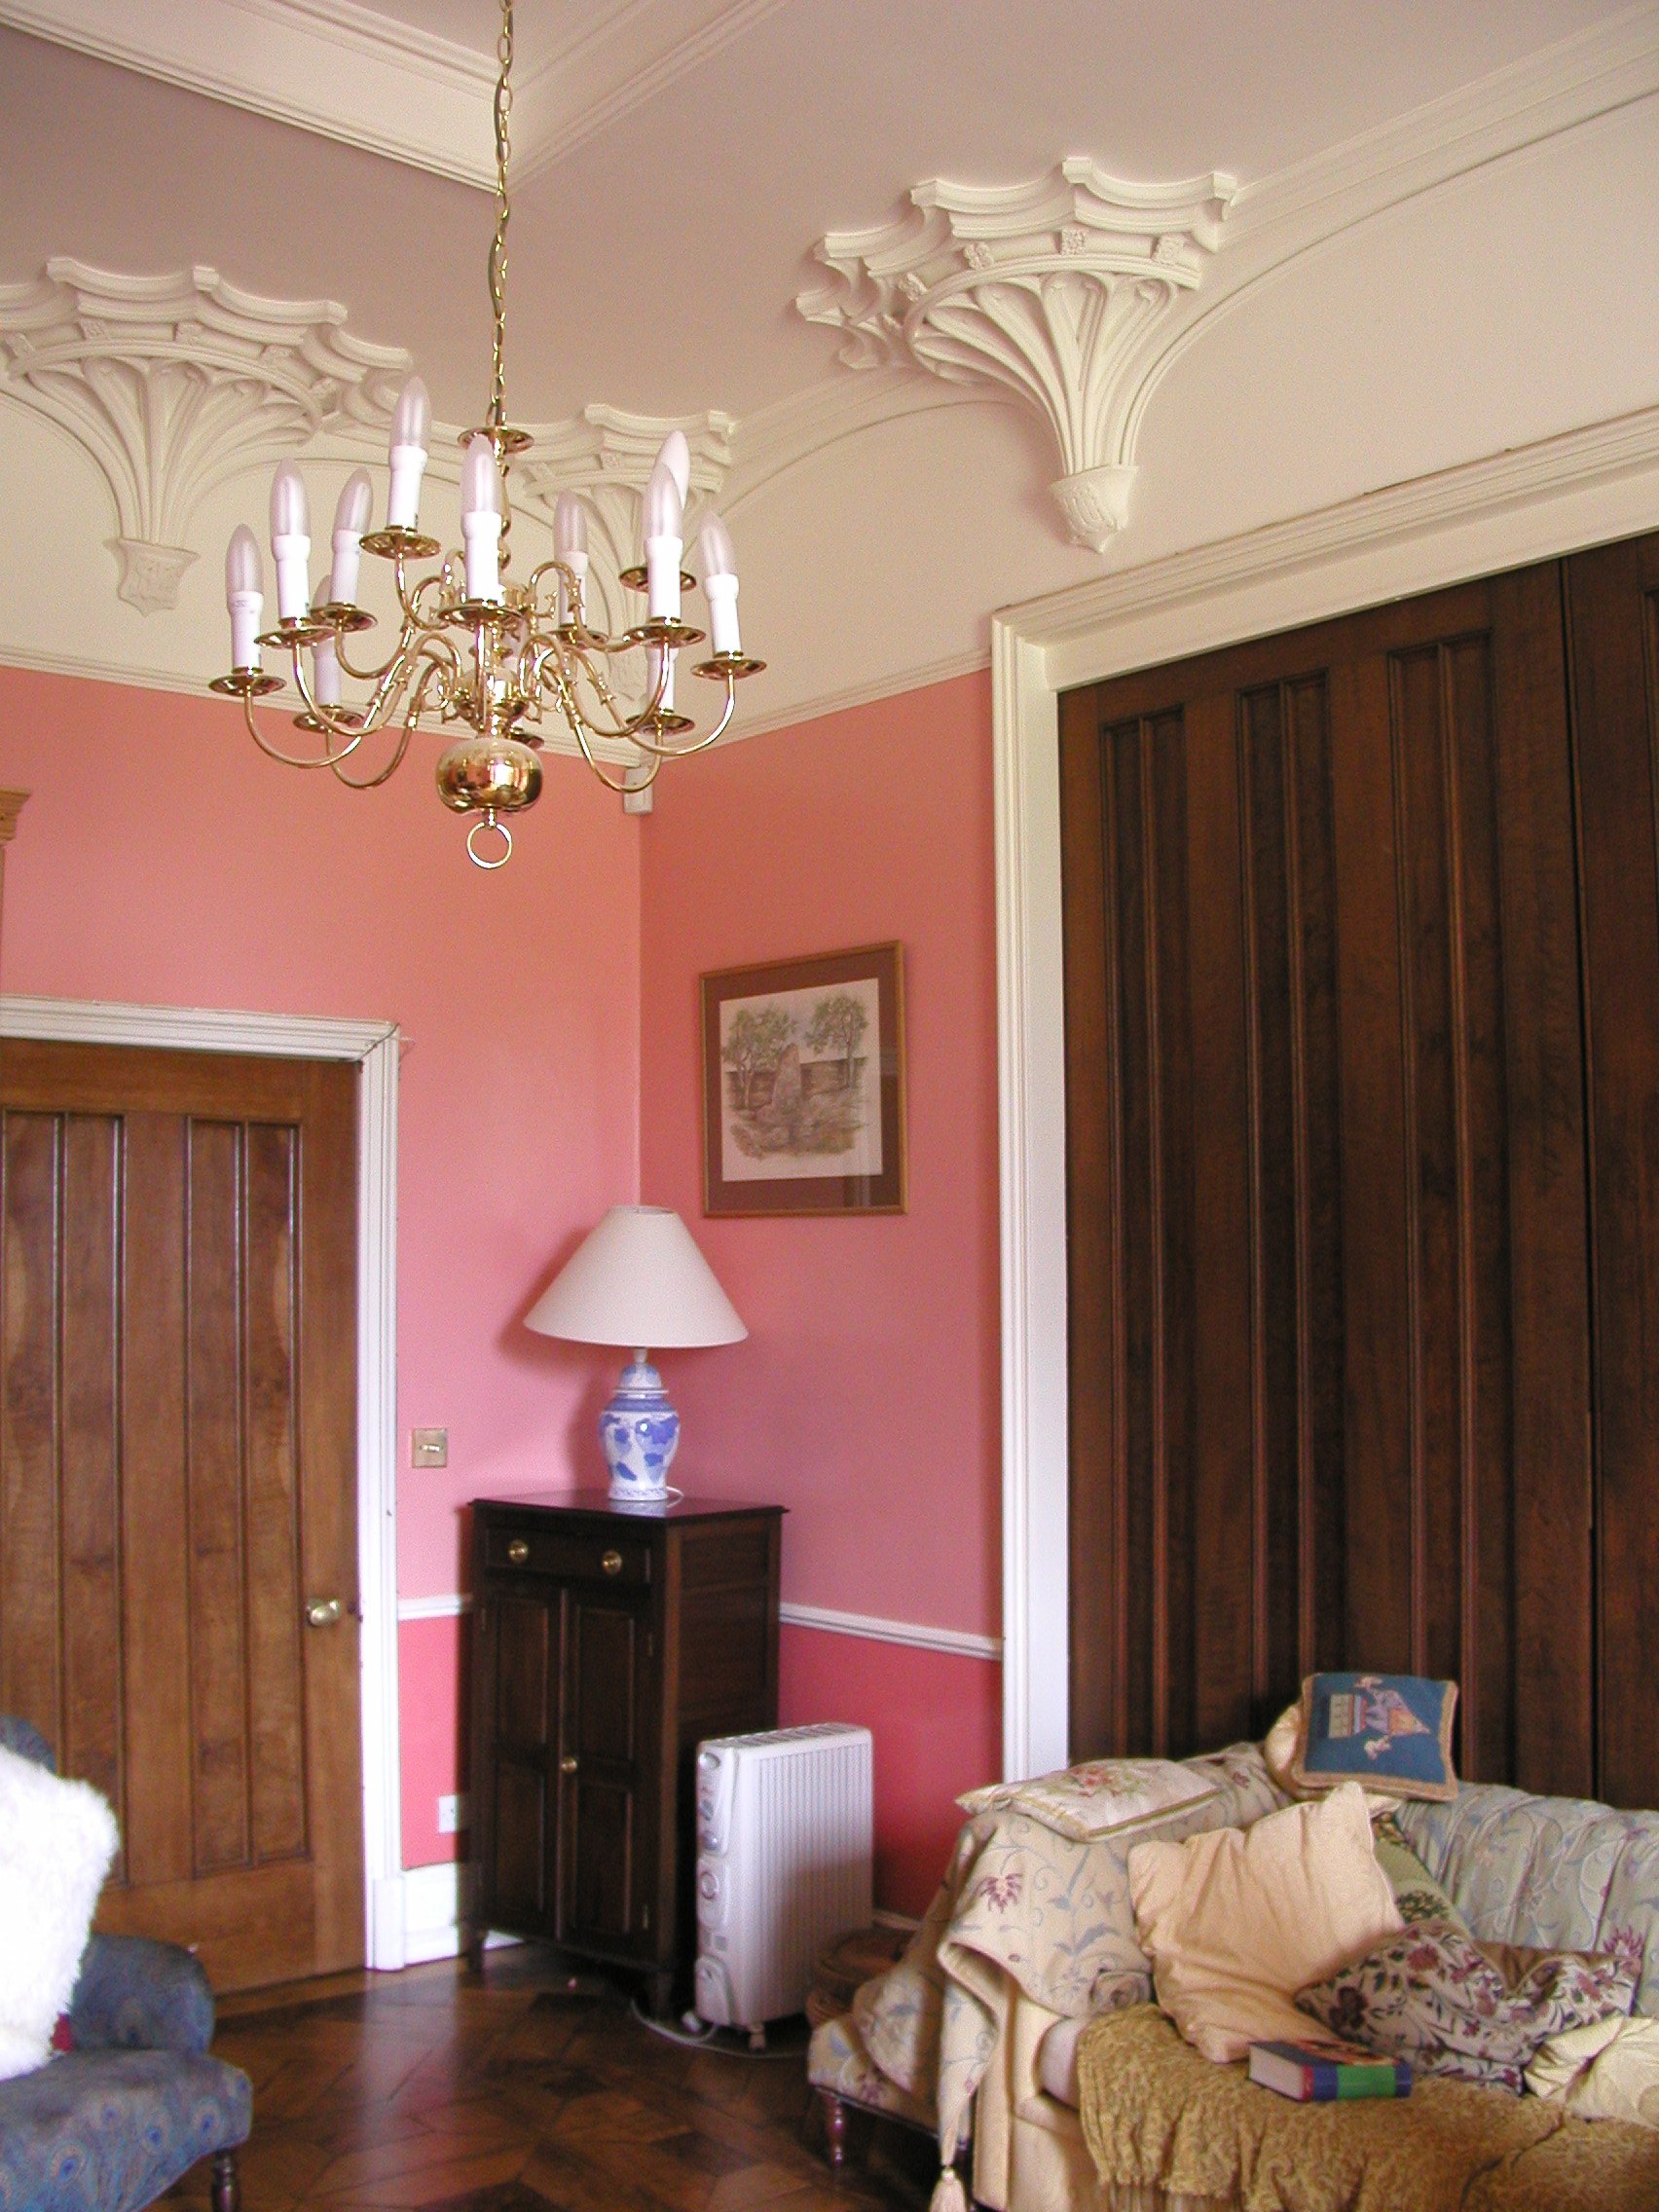 JPEG image - A smaller sitting room, with a lovely hardwood floor and more fancy ceiling plasterwork 